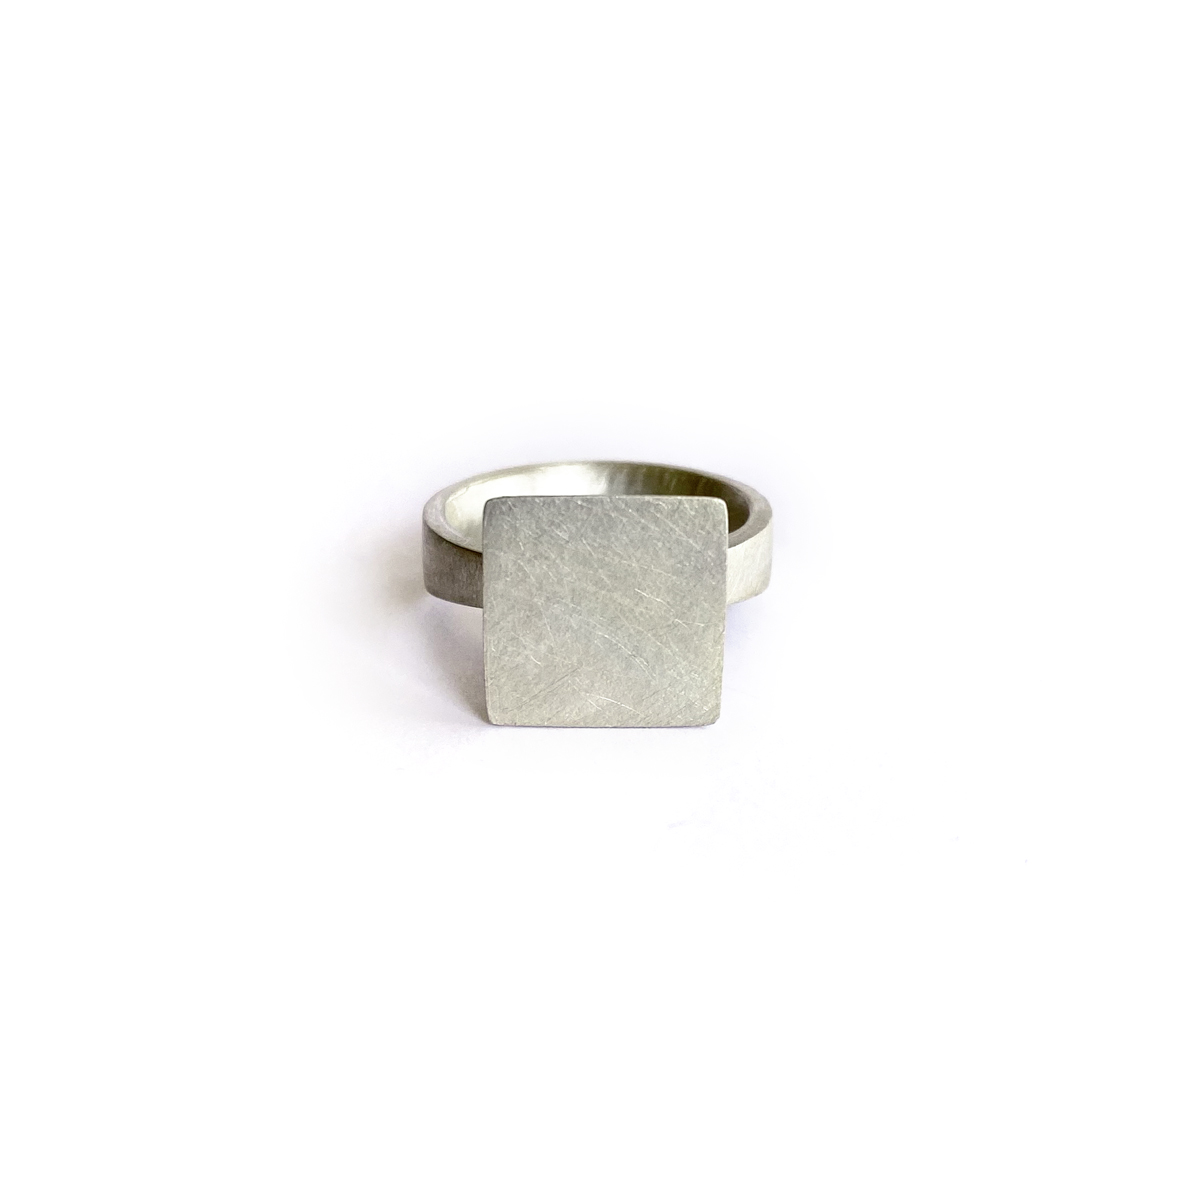 Perspective Ring, sterling silver, 2020, Kate Alterio